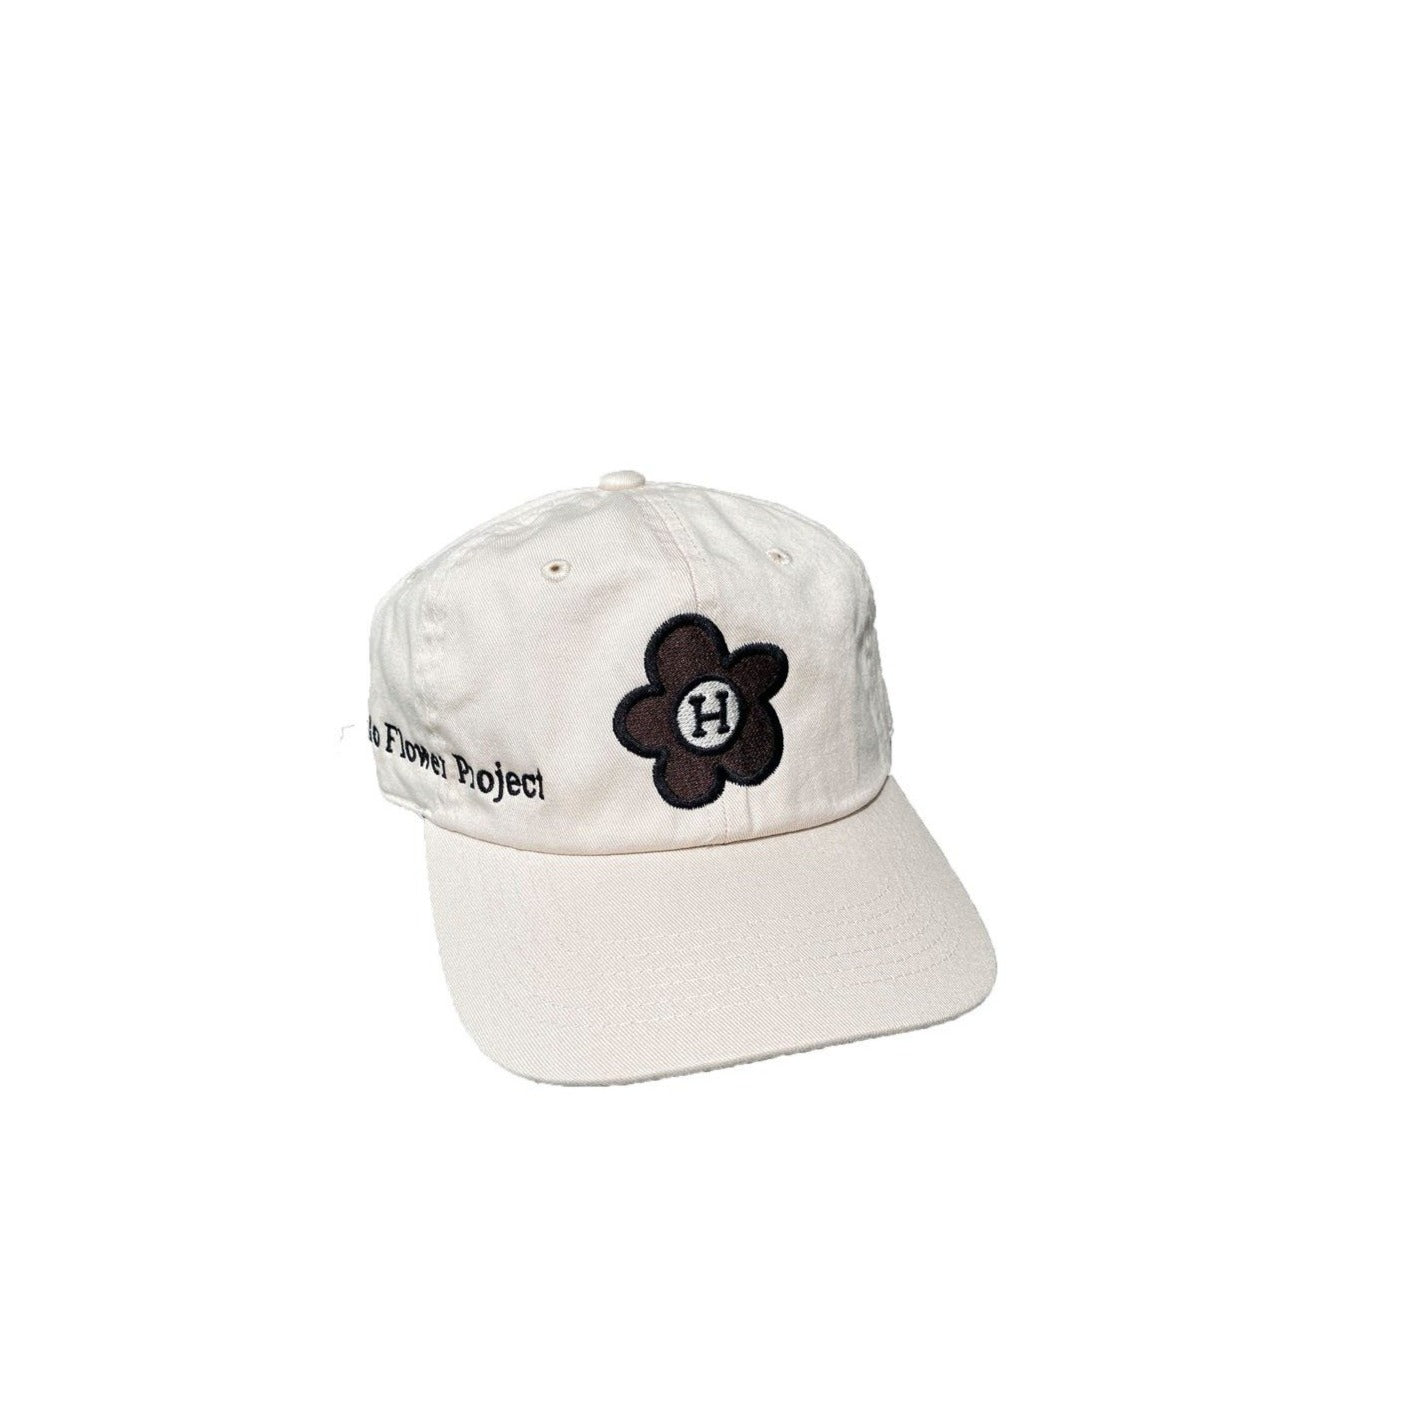 Brown Halo Flower Project Cap